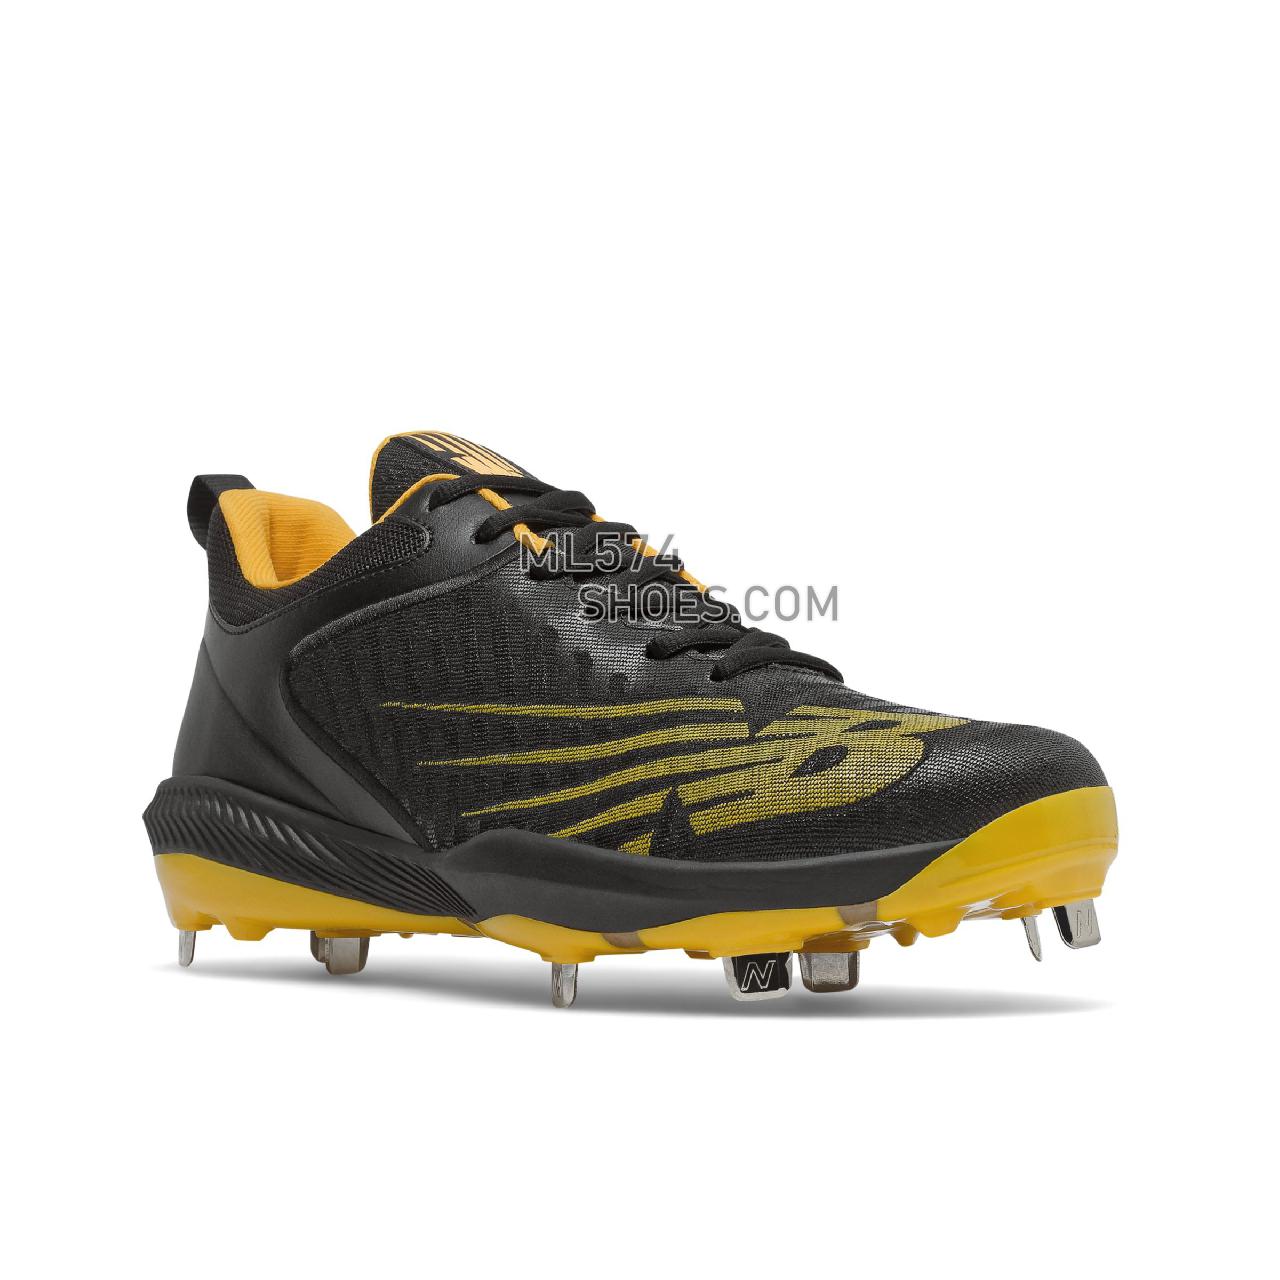 New Balance FuelCell 4040 v6 Metal - Men's Mid-Cut Baseball Cleats - Black with Yellow - L4040BY6